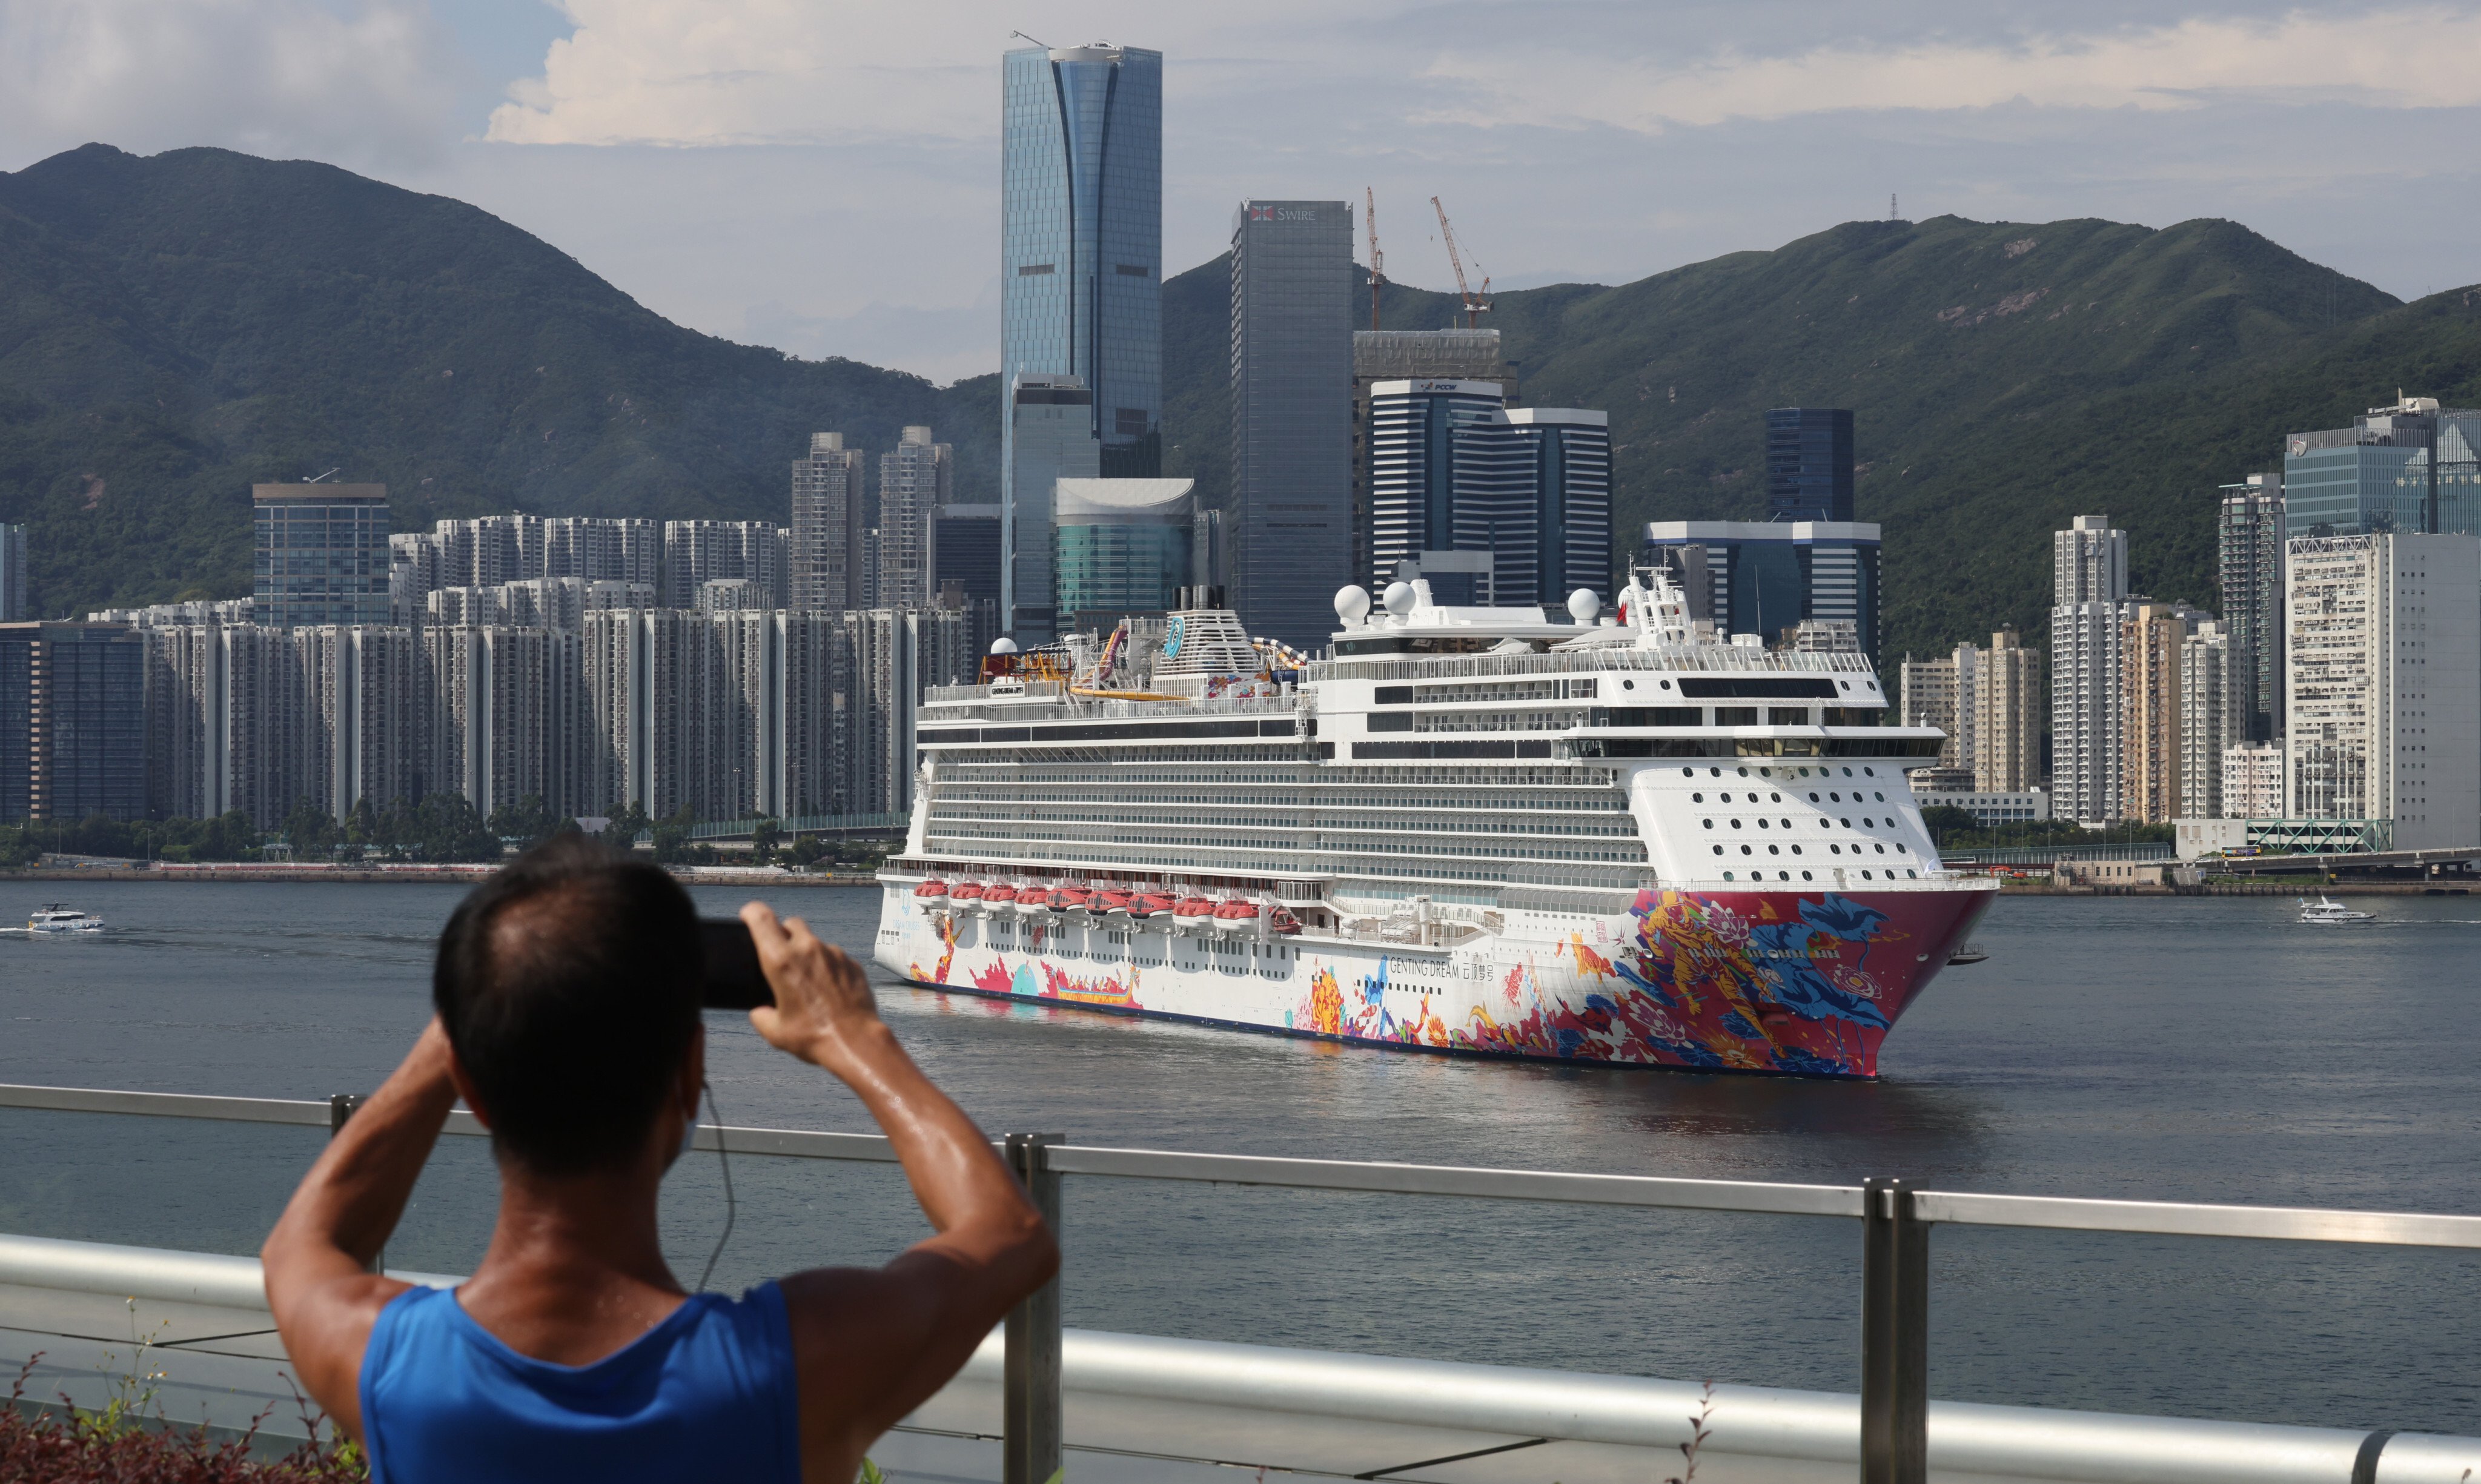 The Genting Dream, the flagship of the Genting Hong Kong cruise company, returns to the Kai Tak Cruise Terminal in Hong Kong on August 1, 2021. Photo: Nora Tam